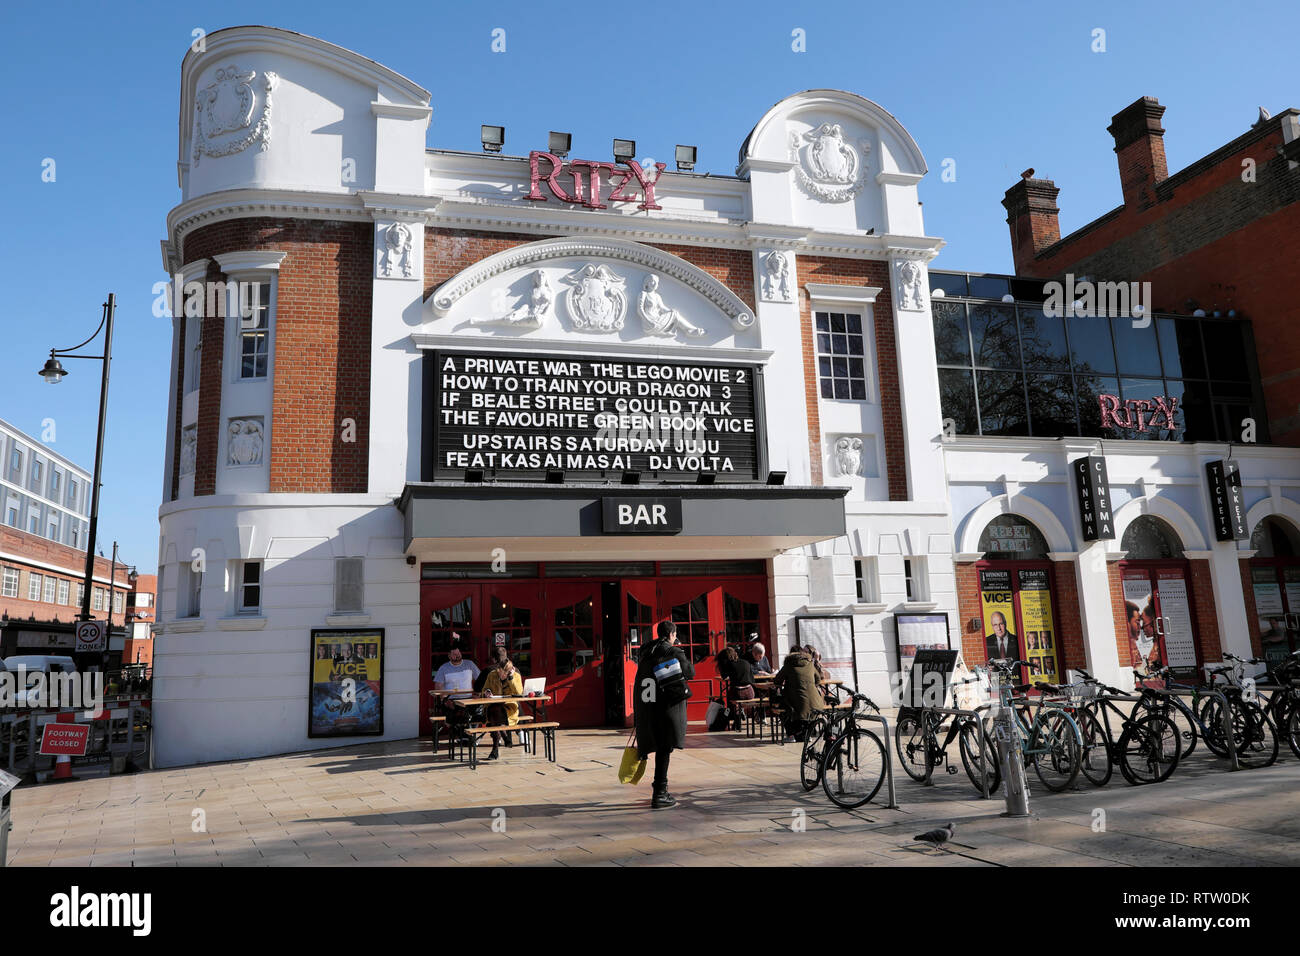 Ritzy Cinema and Bar exterior view showing movies films in Brixton South London England UK Great Britain Europe  KATHY DEWITT Stock Photo